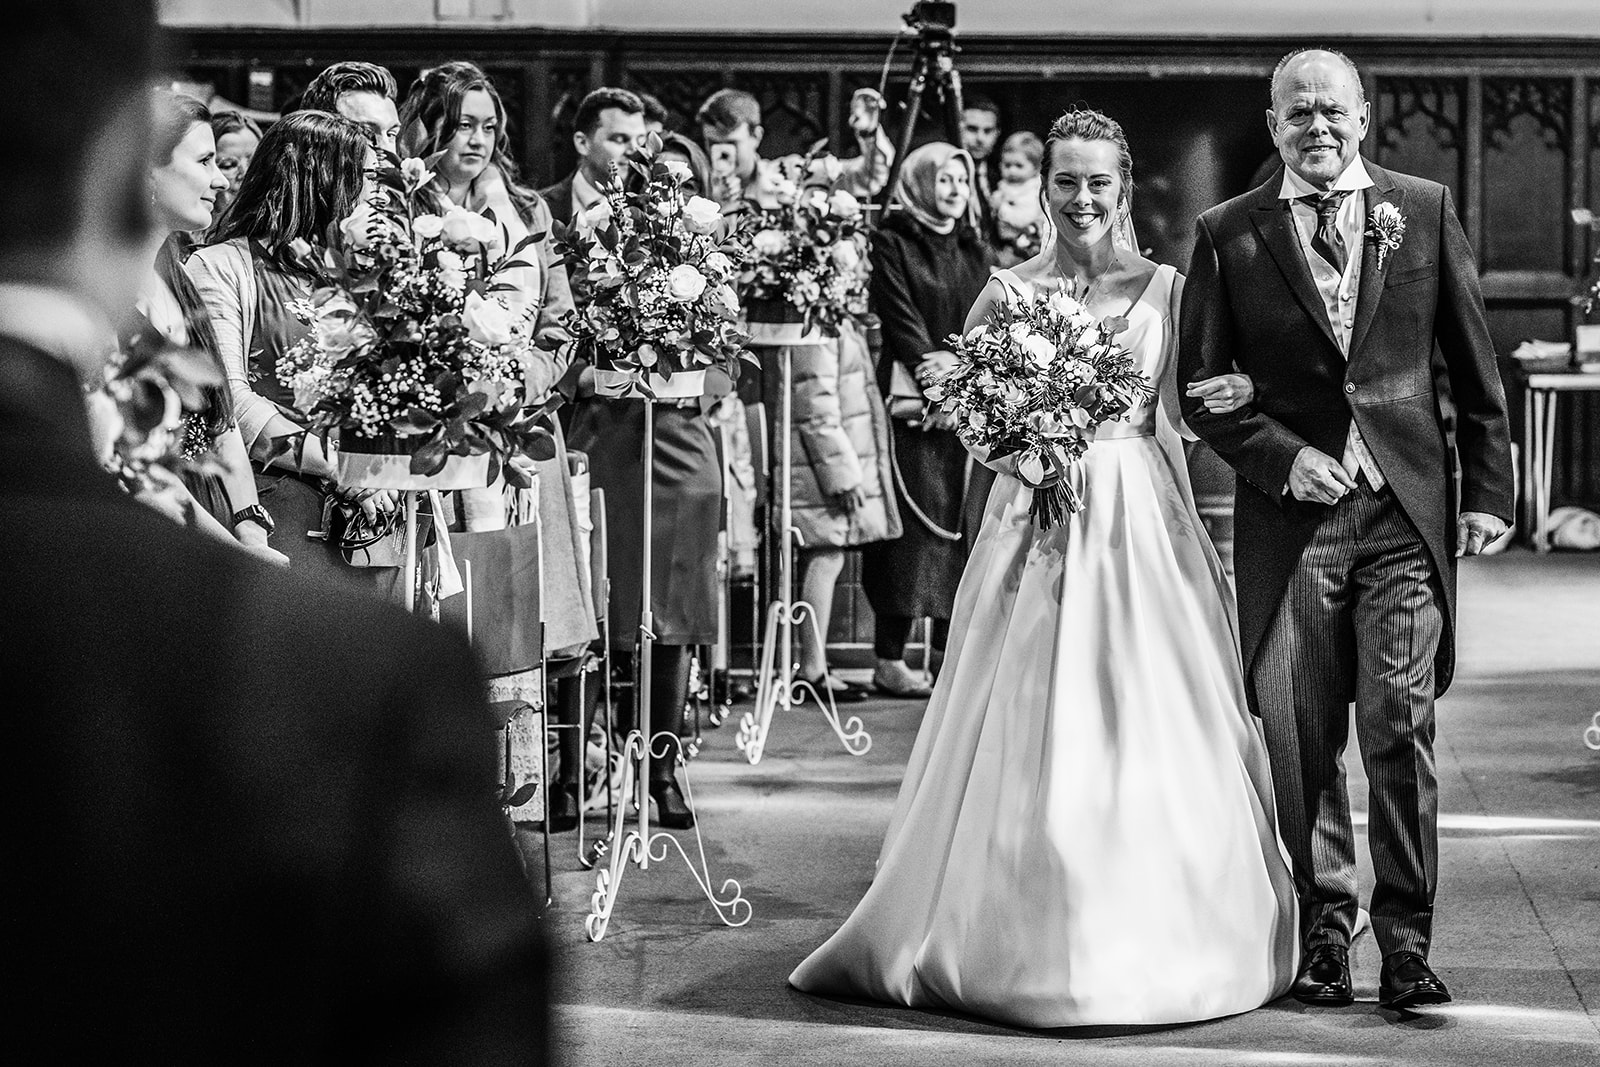 The bride and her father walking down the aisle